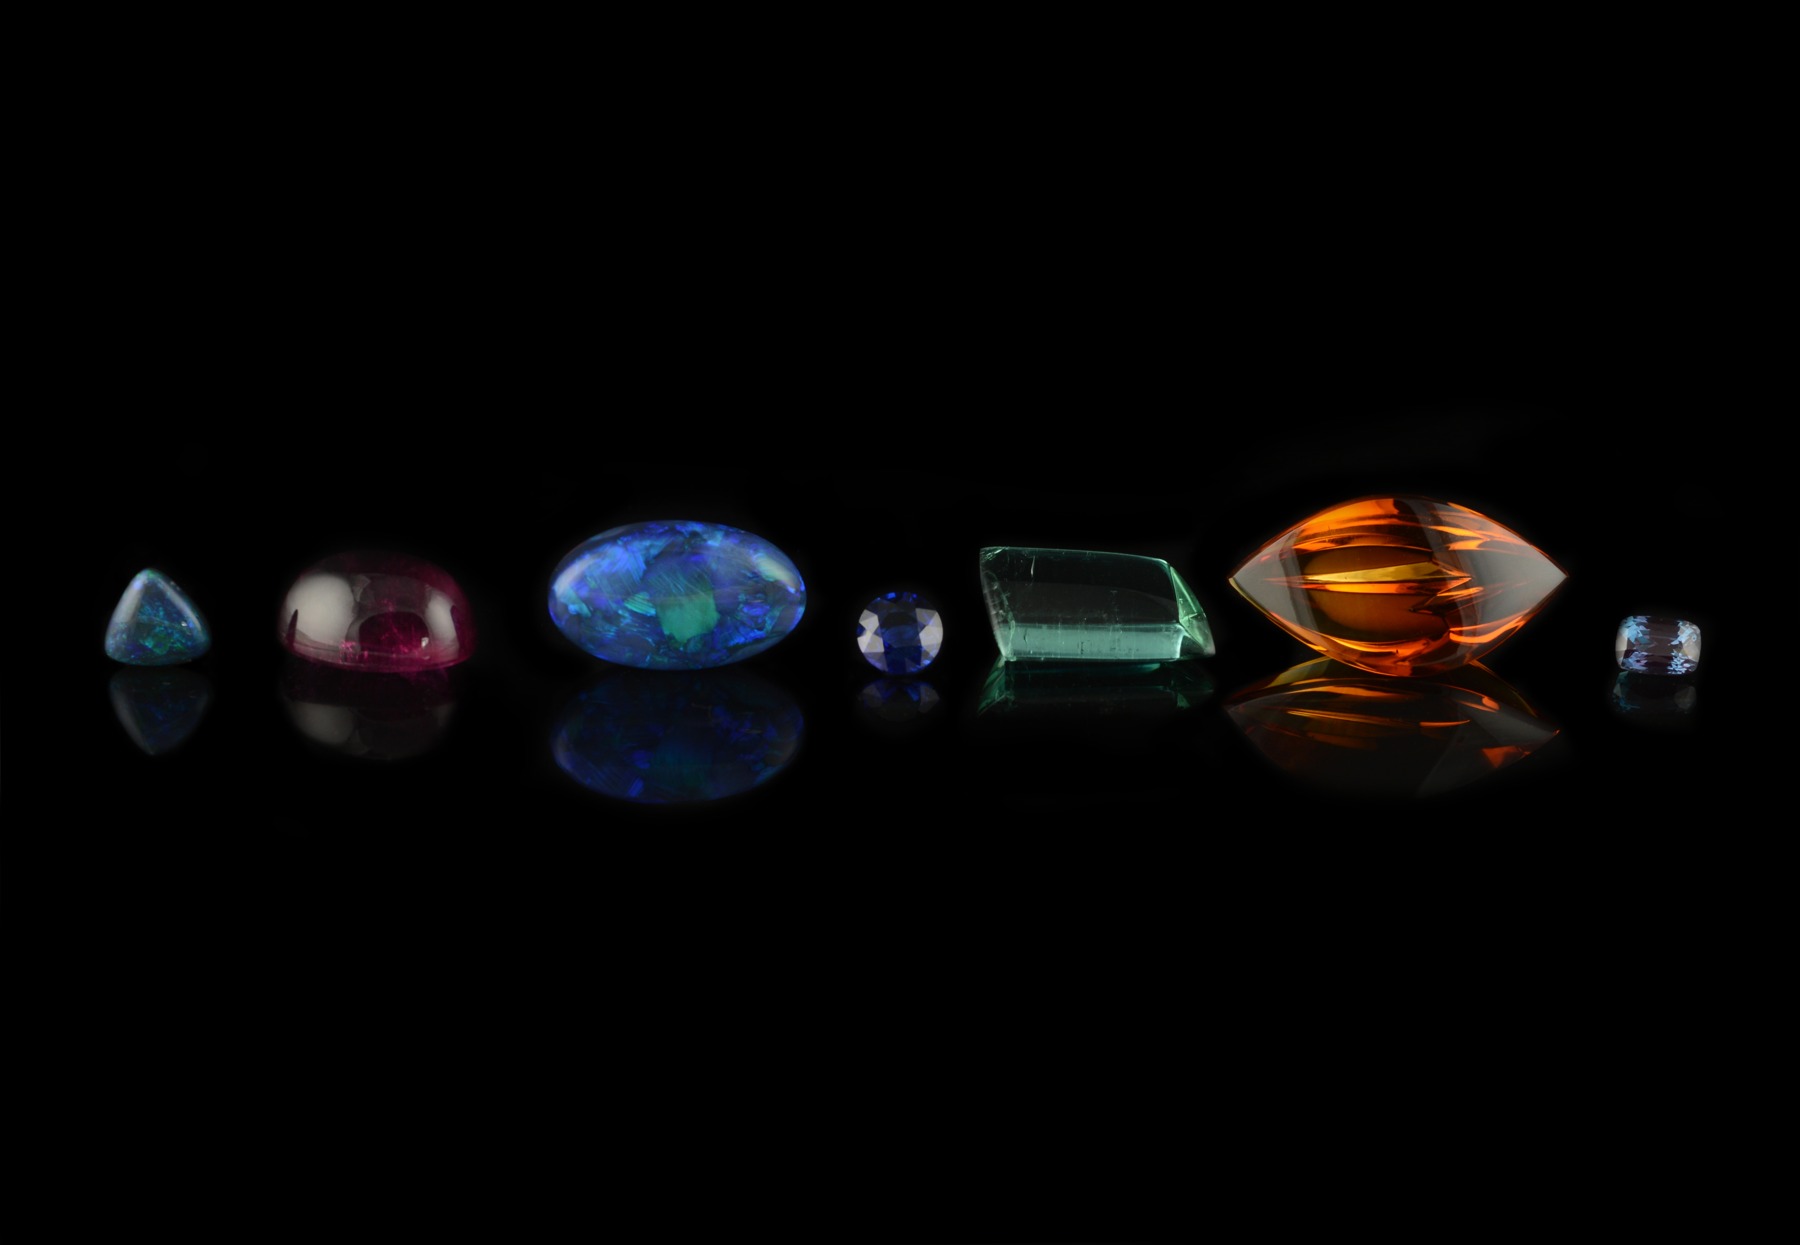 Loose gemstones for commissions, from left to right: black opal, rubellite tourmaline, White cliffs black opal, sapphire, petrol blue trapezoid tourmaline, citrine, alexandrite